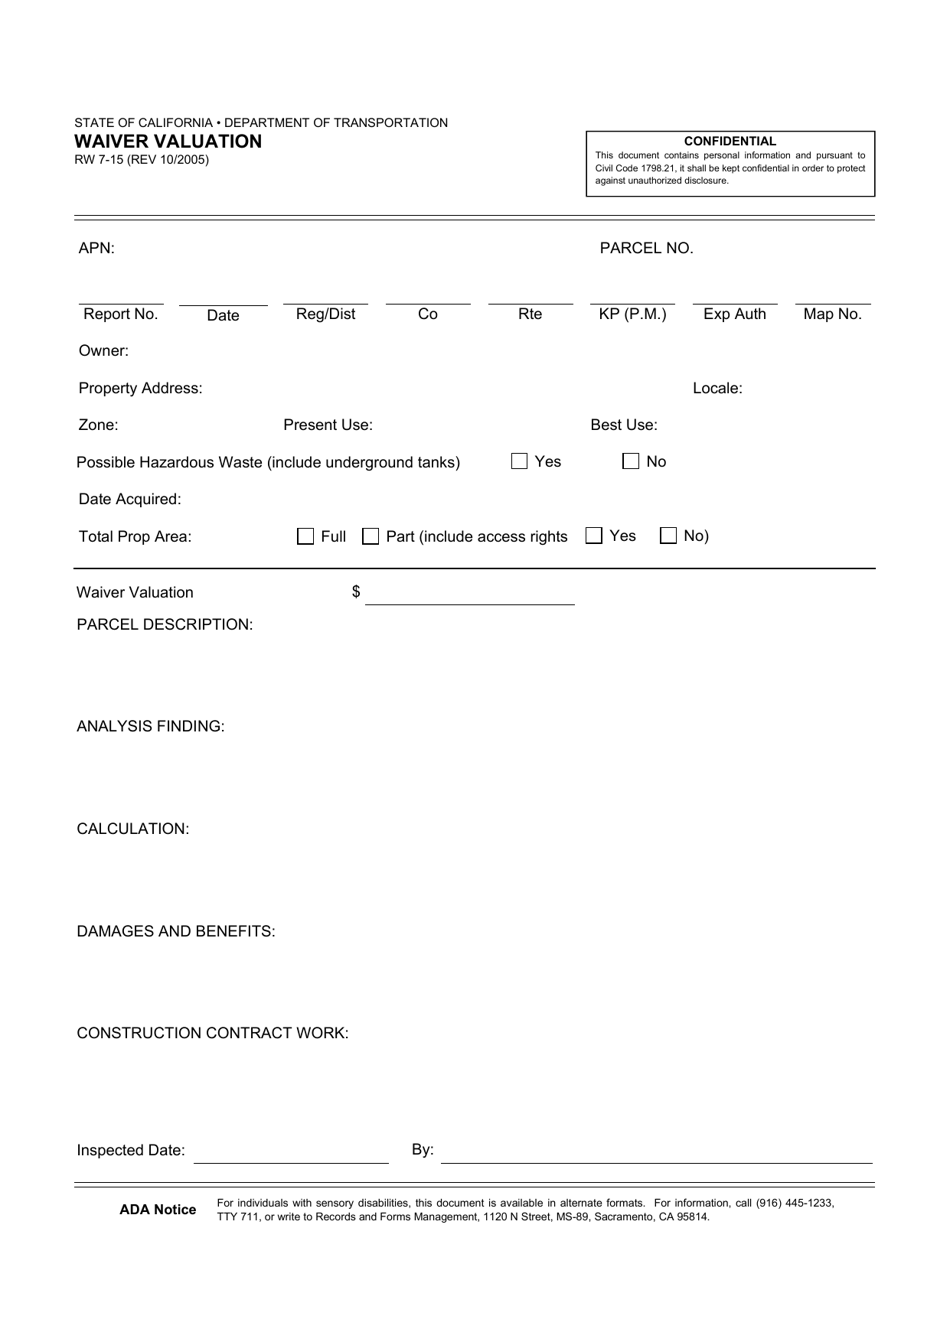 Form RW7-15 Waiver Valuation - California, Page 1